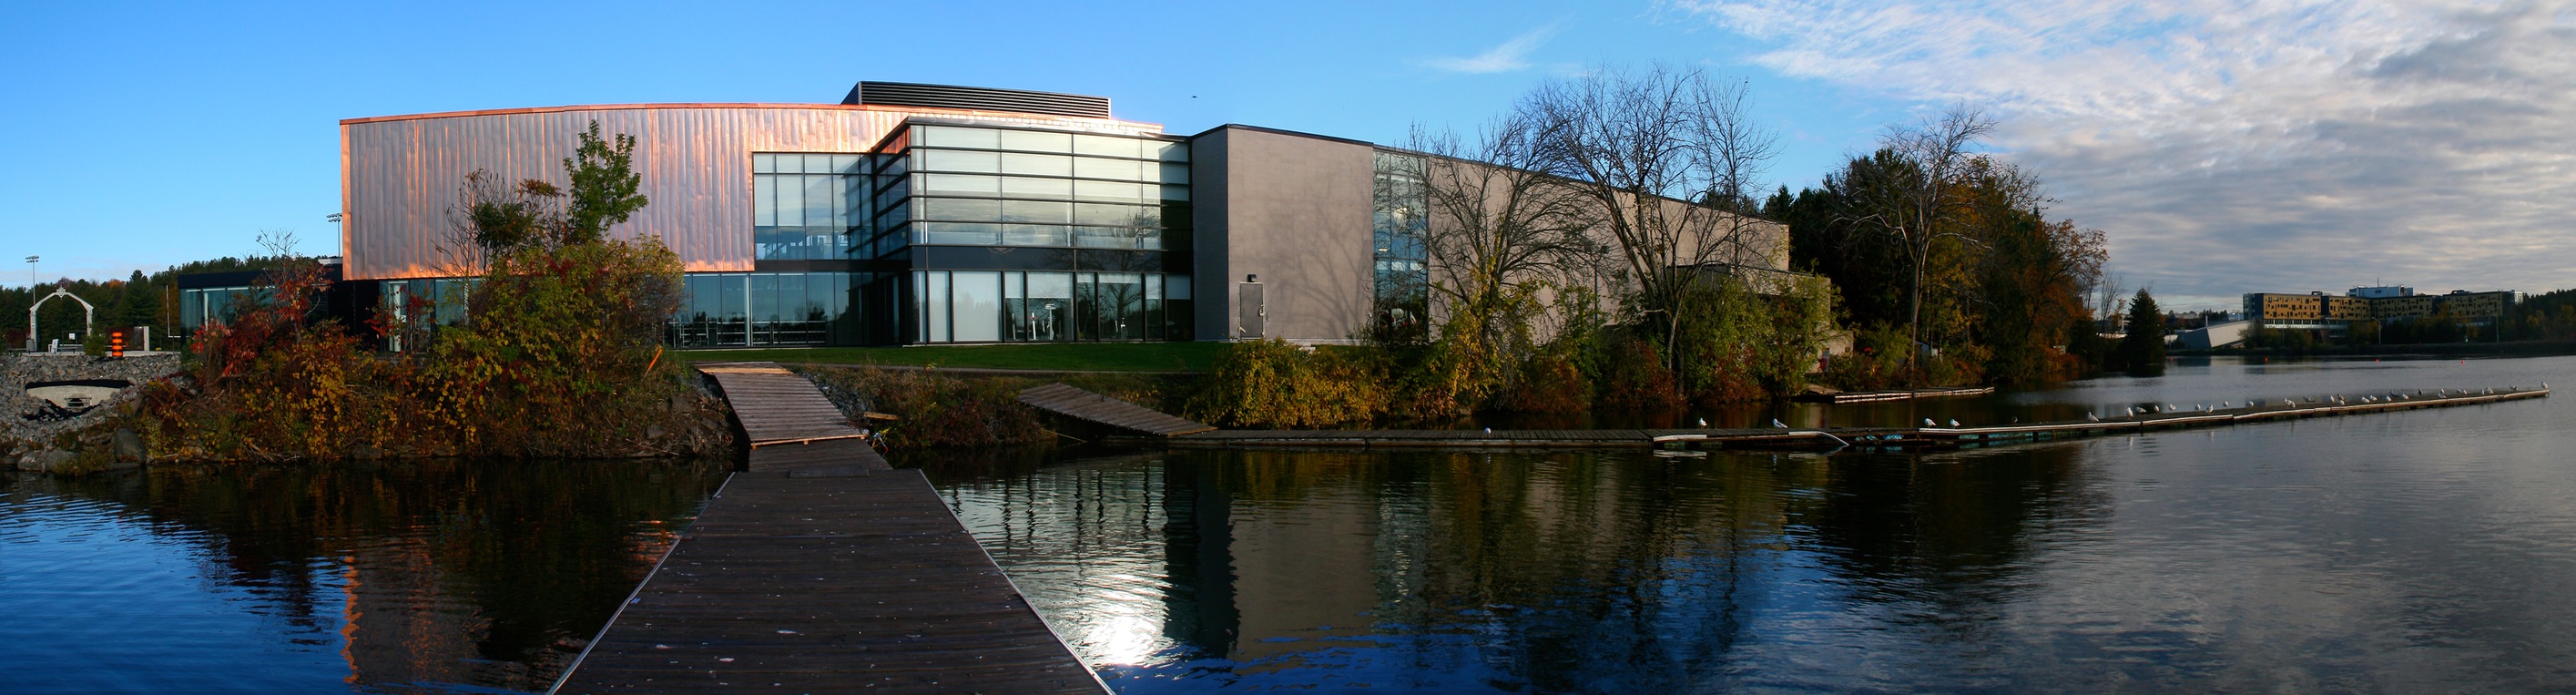 A wide angle shot of the Trent Athletics Centre taken from the end of a long dock on the Trent Severn Waterway. 